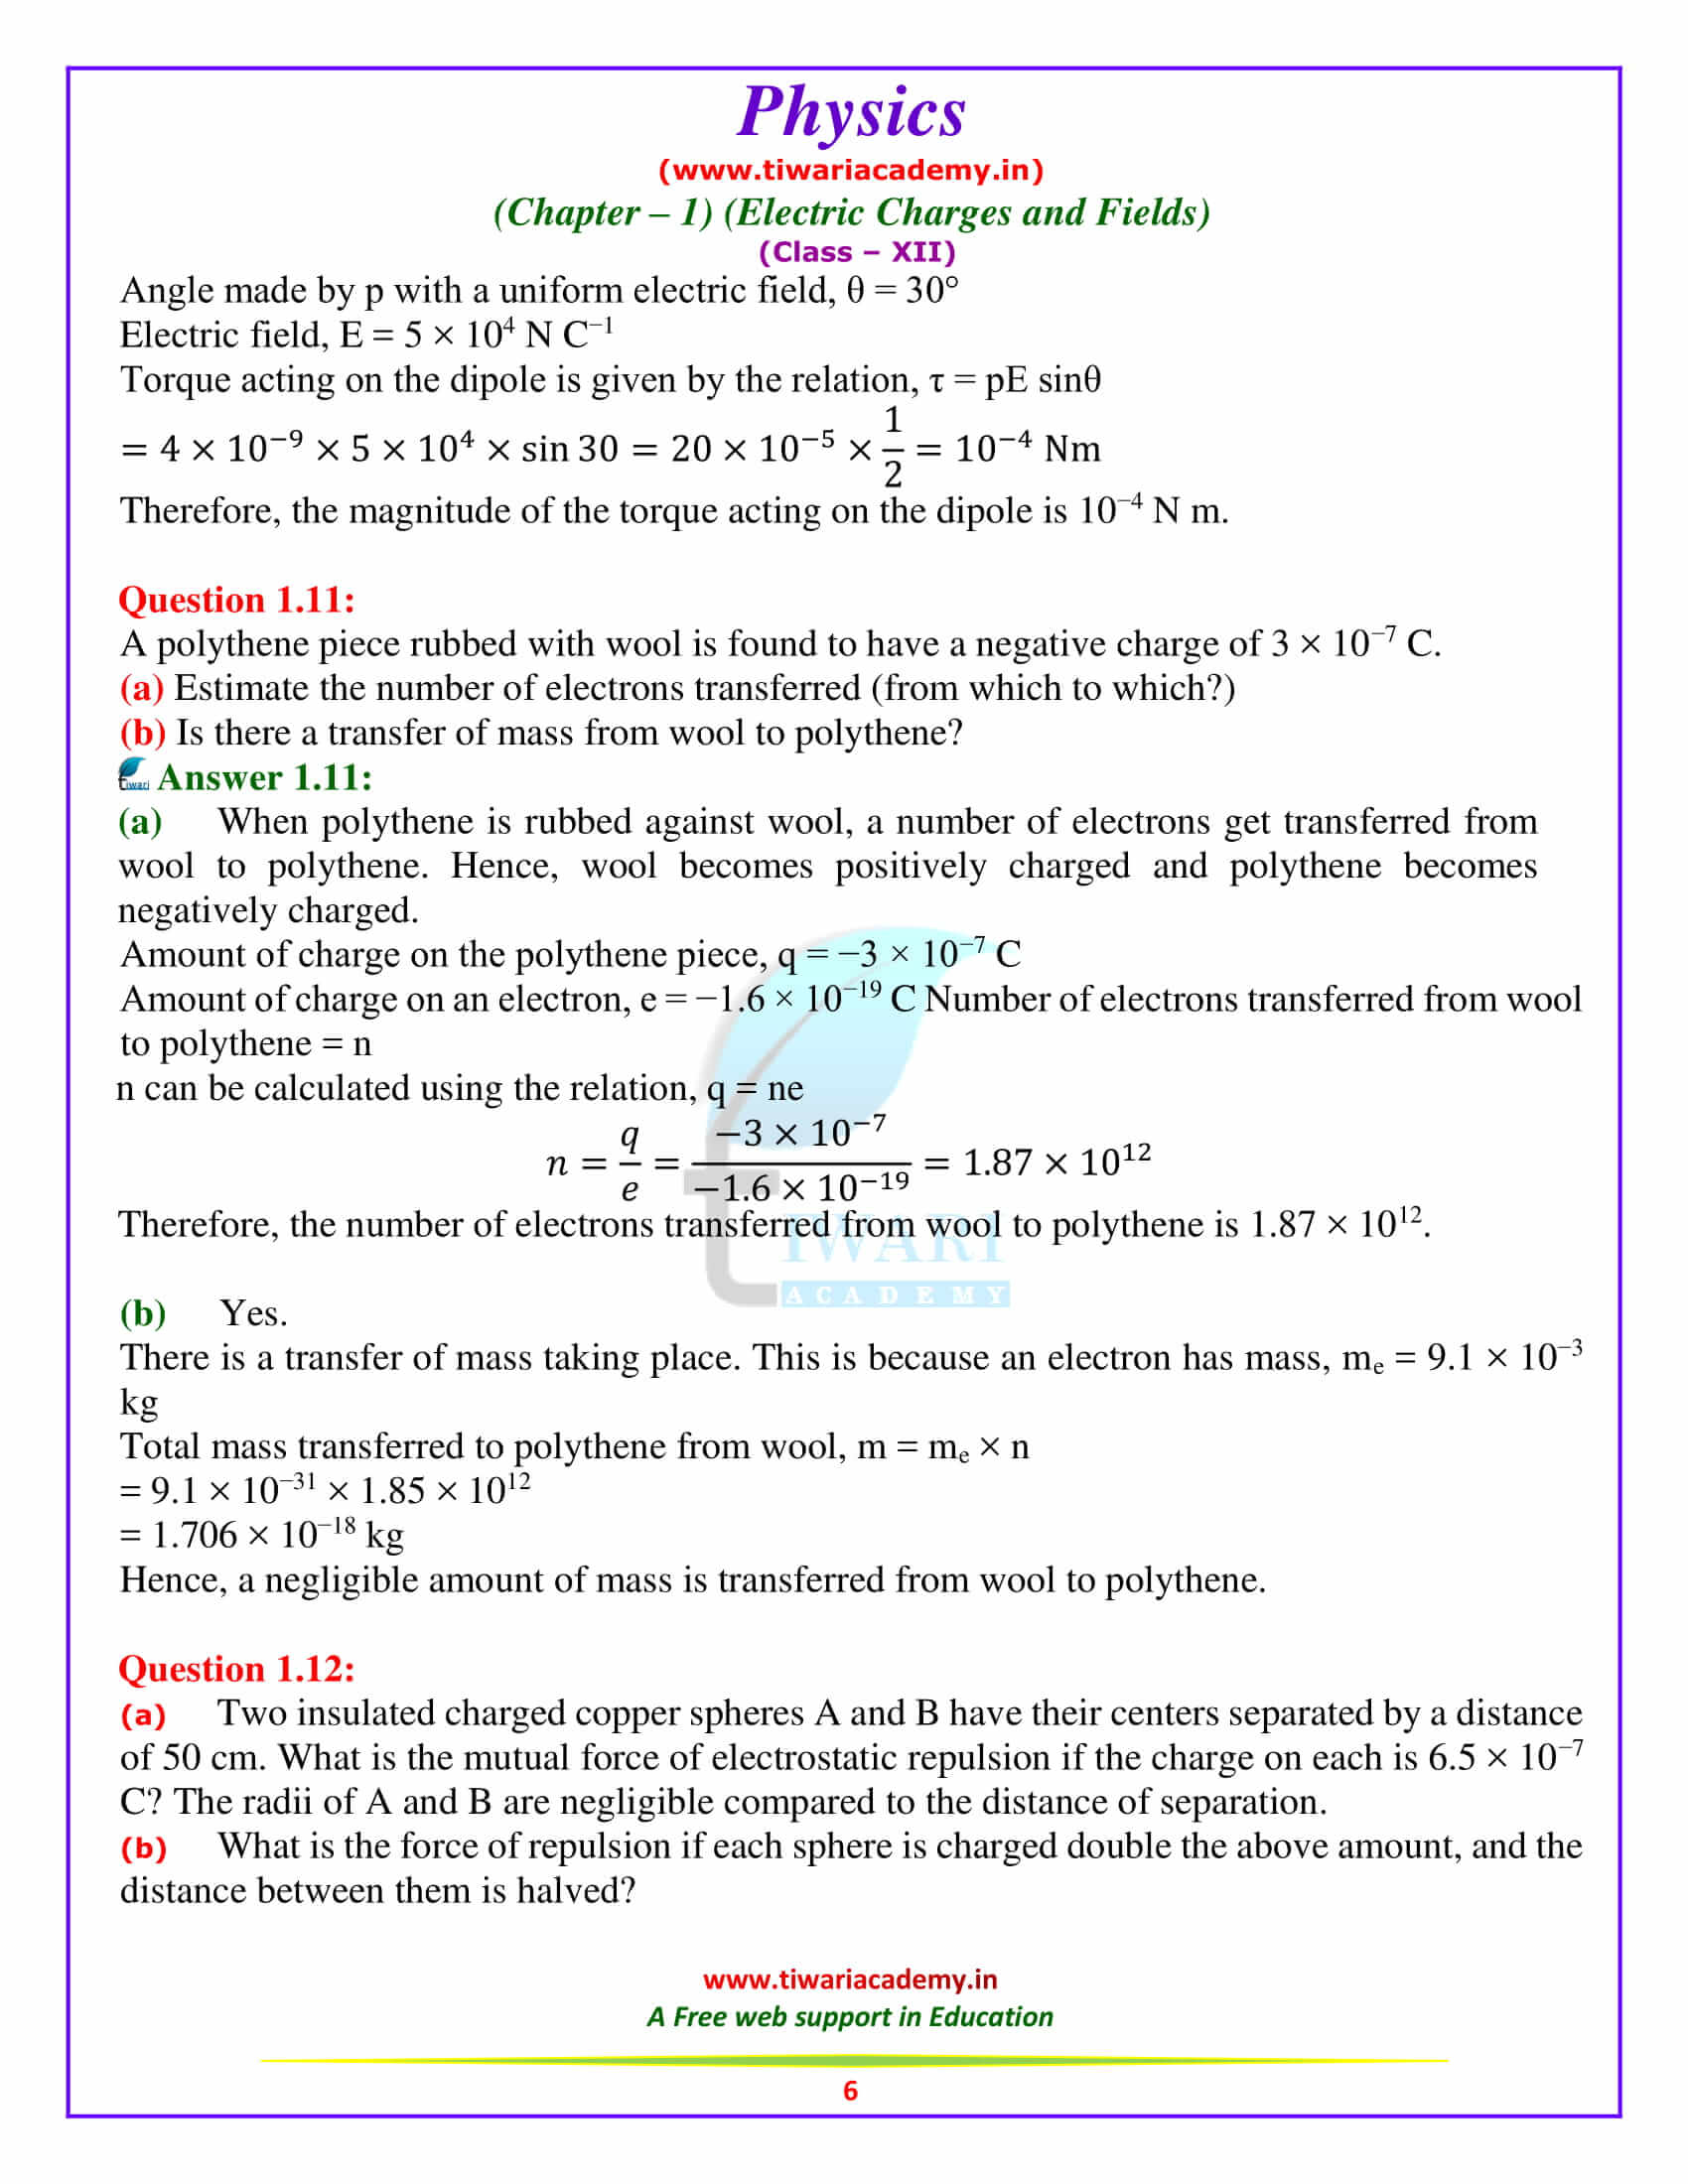 NCERT Solutions for Class 12 Physics Chapter 1 free download